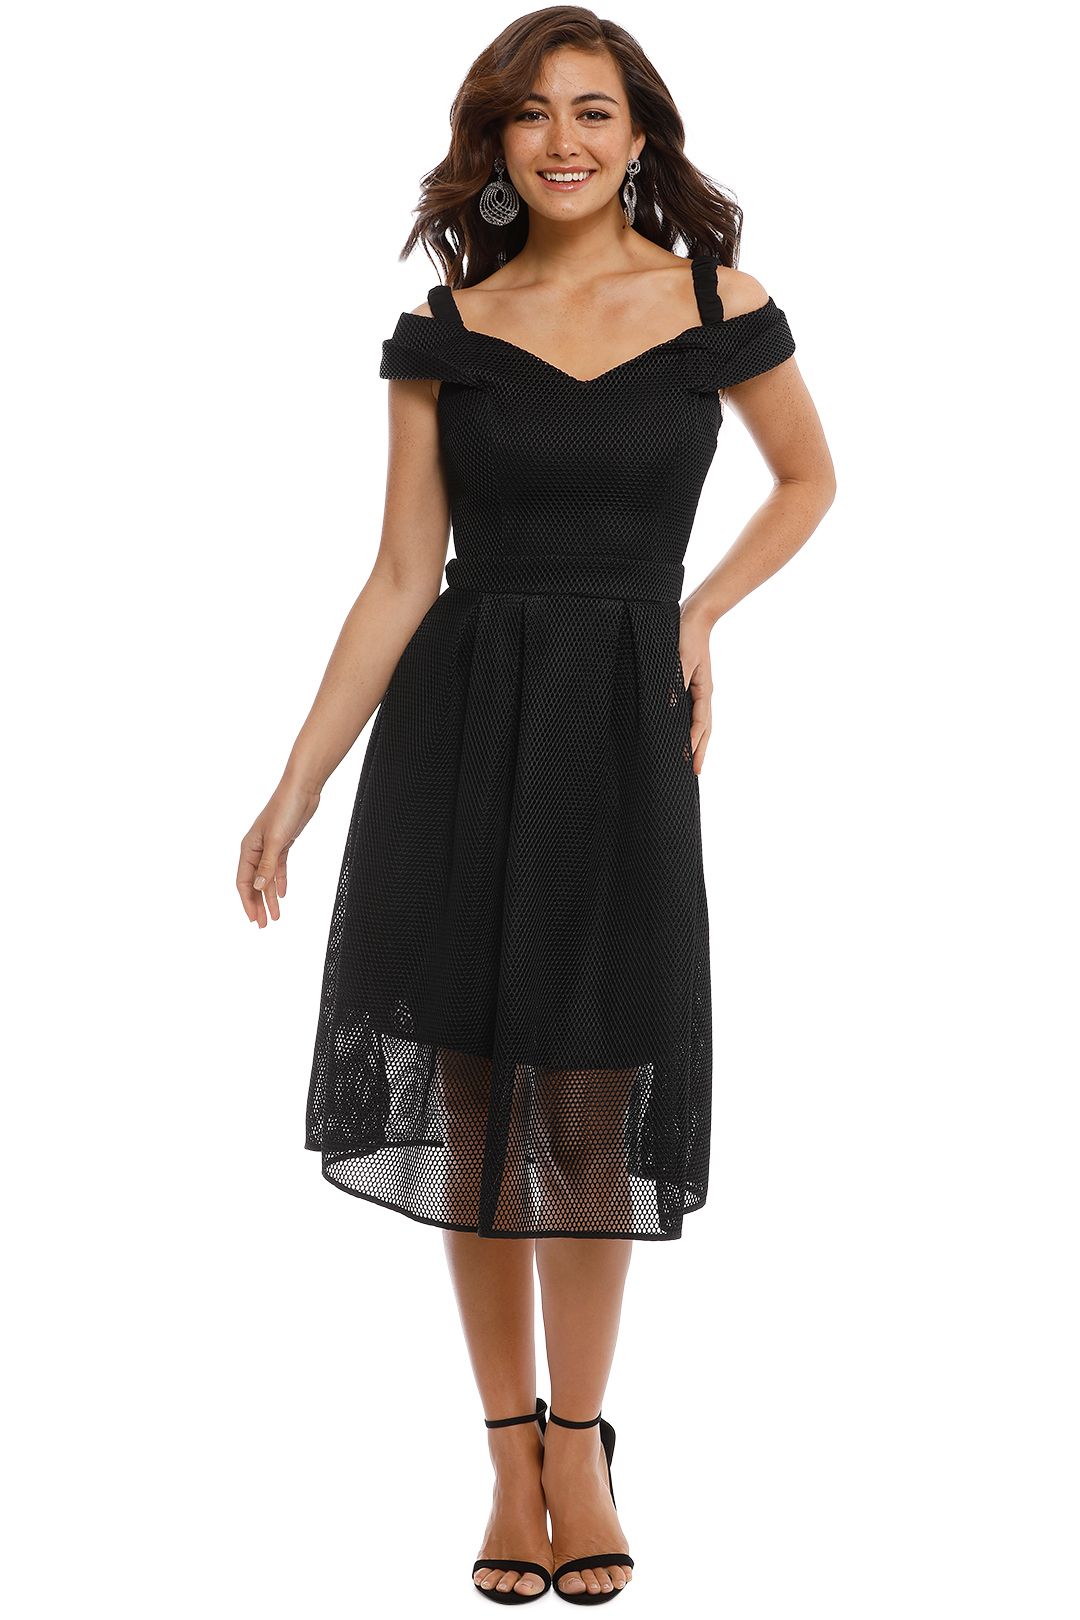 Grace and Hart - Hypnotic Floaty Dress - Black - Front